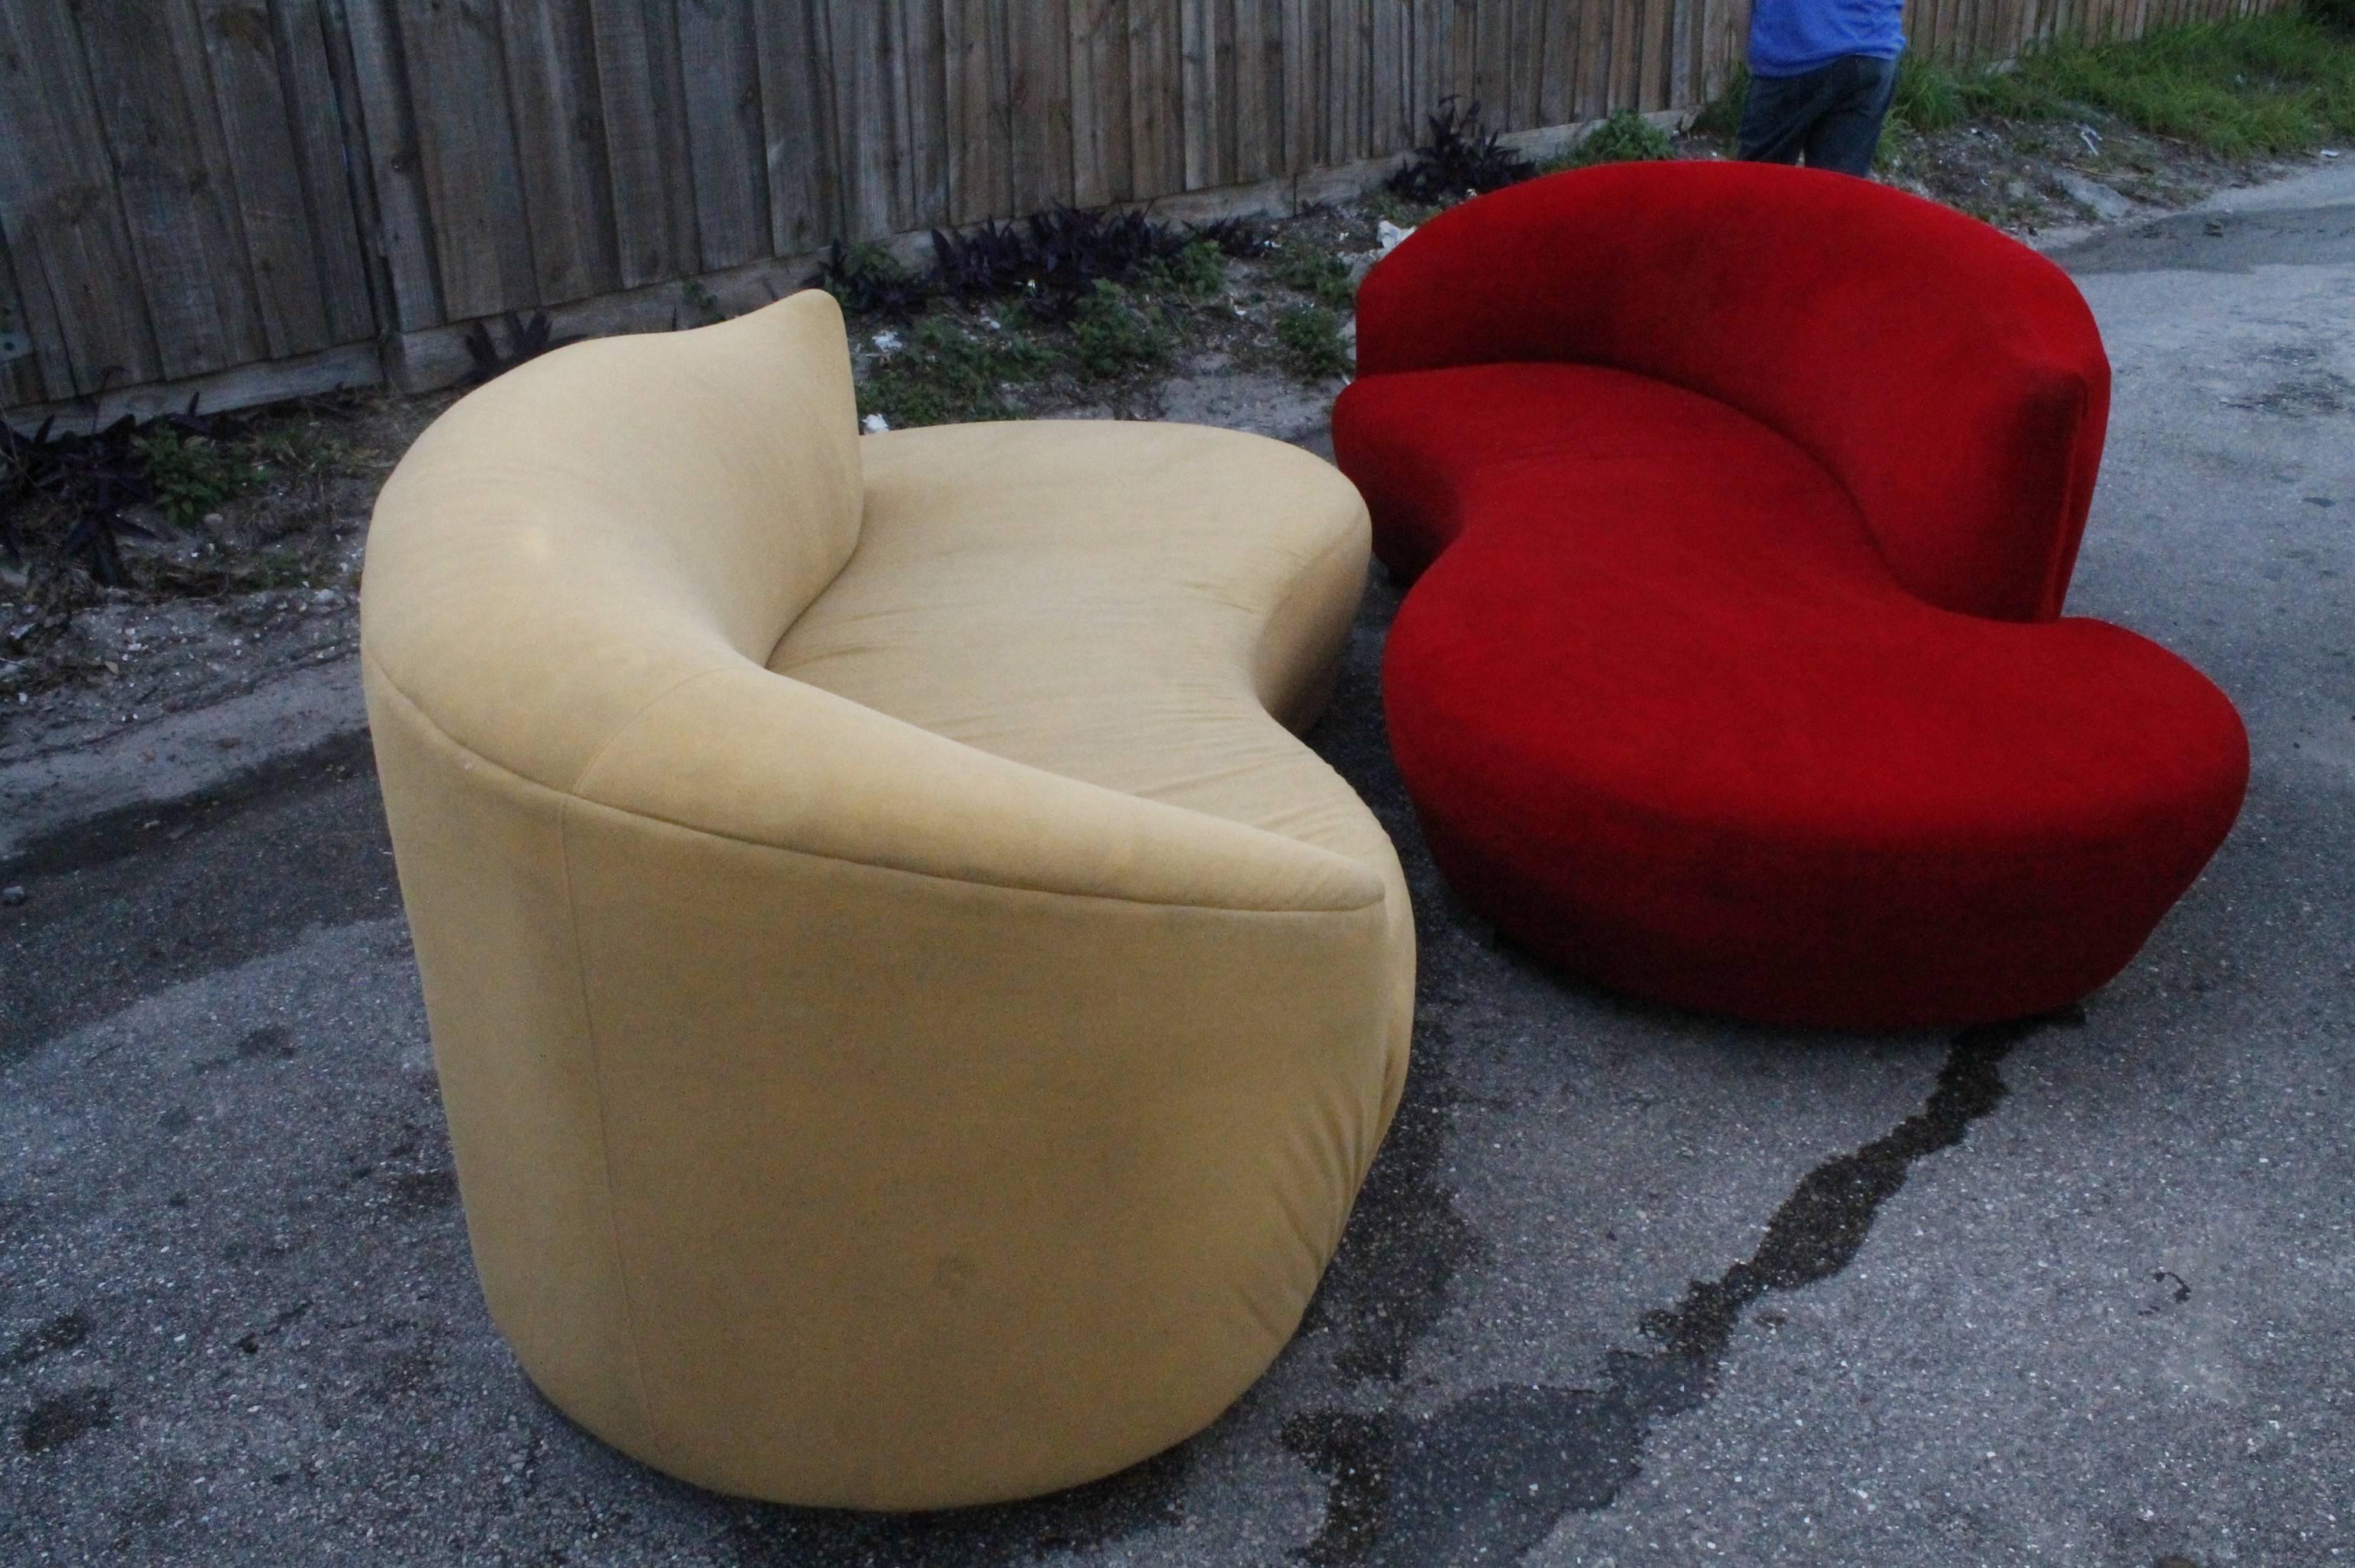 Great vintage Hollywood Regency pair of cloud sofas. Free form curved, original ultrasuede fabric with chrome feet. When placed together or on opposite walls they form the Yin Yang symbol. These have both been professionally steam cleaned the day